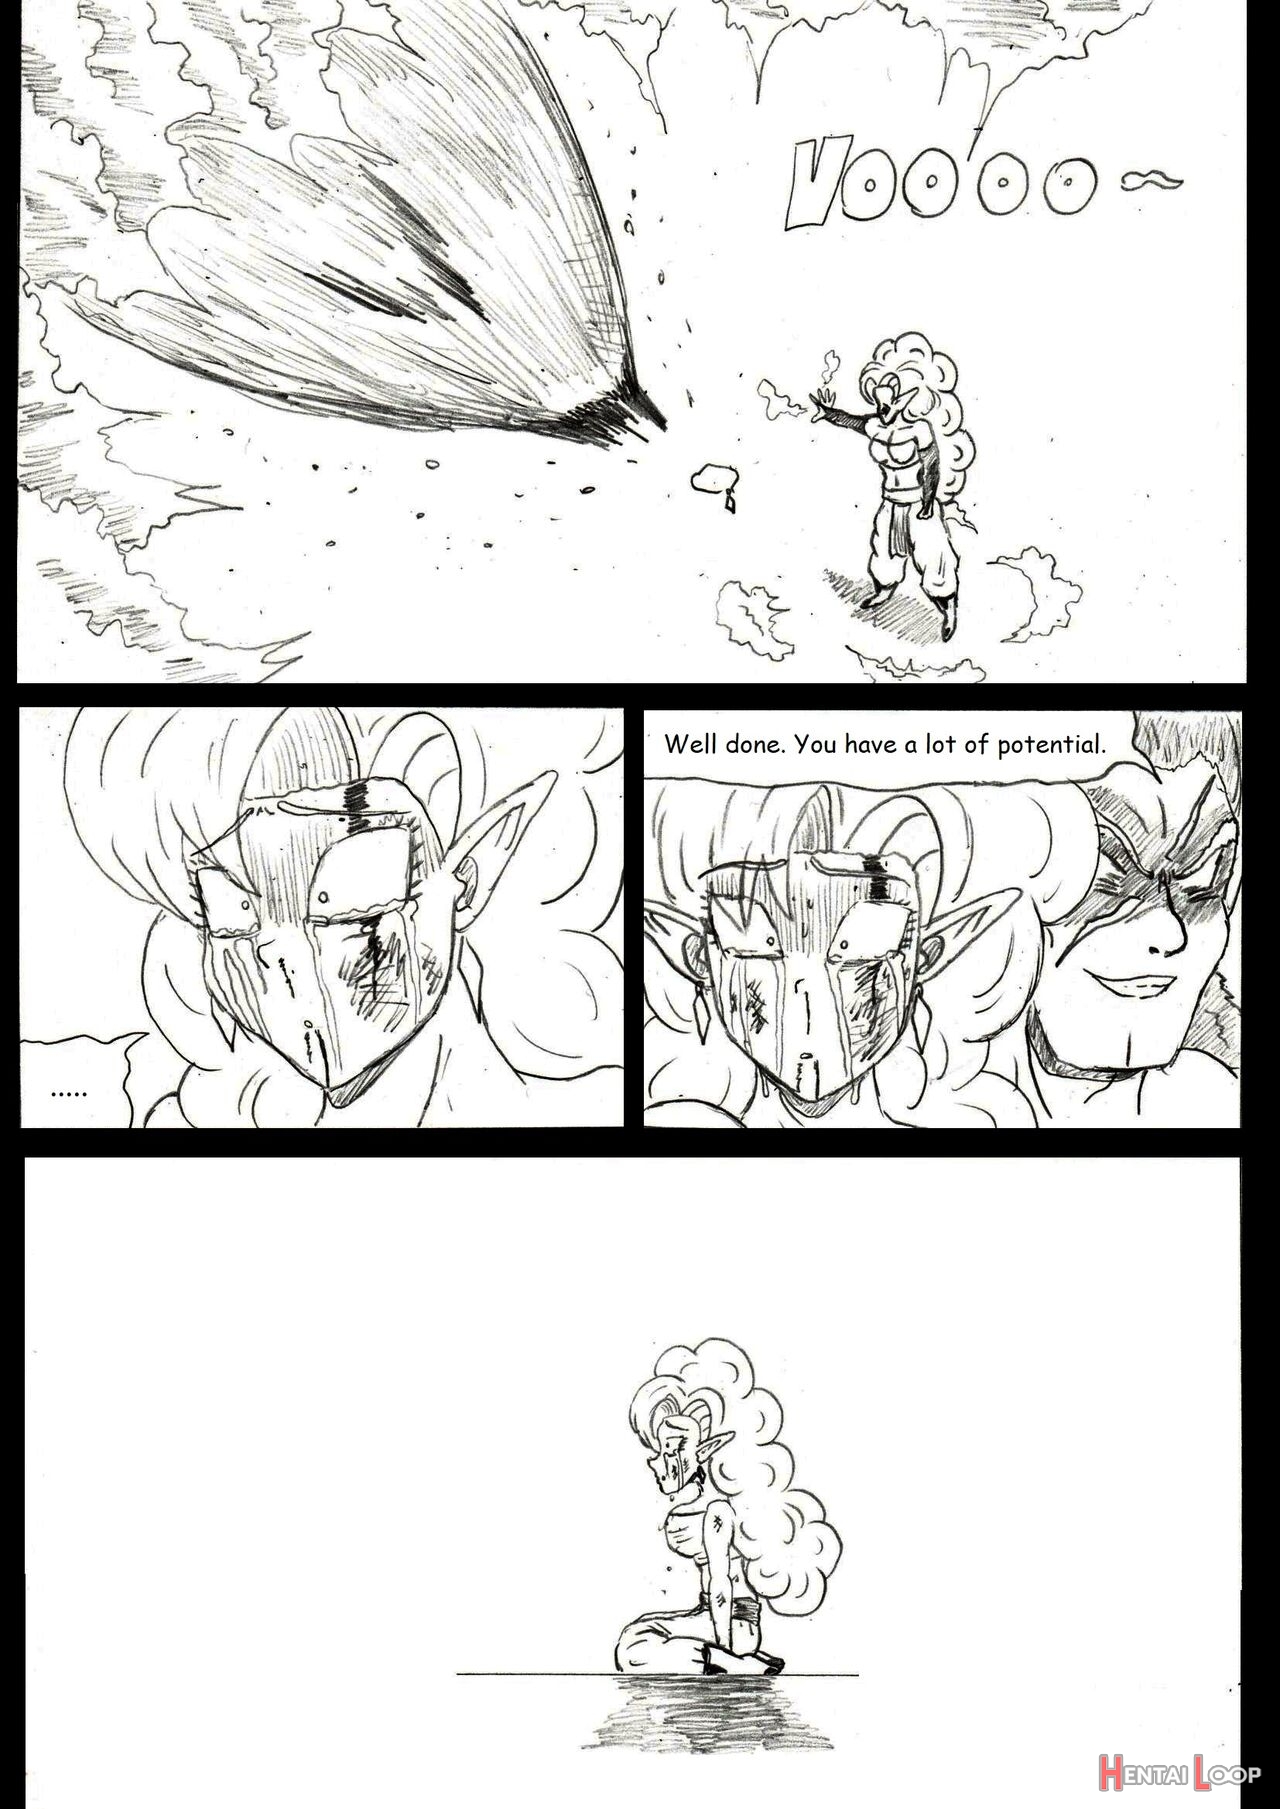 Dragonball Z Golden Age - Chapter 4 - The Galaxy Soldiers page 9